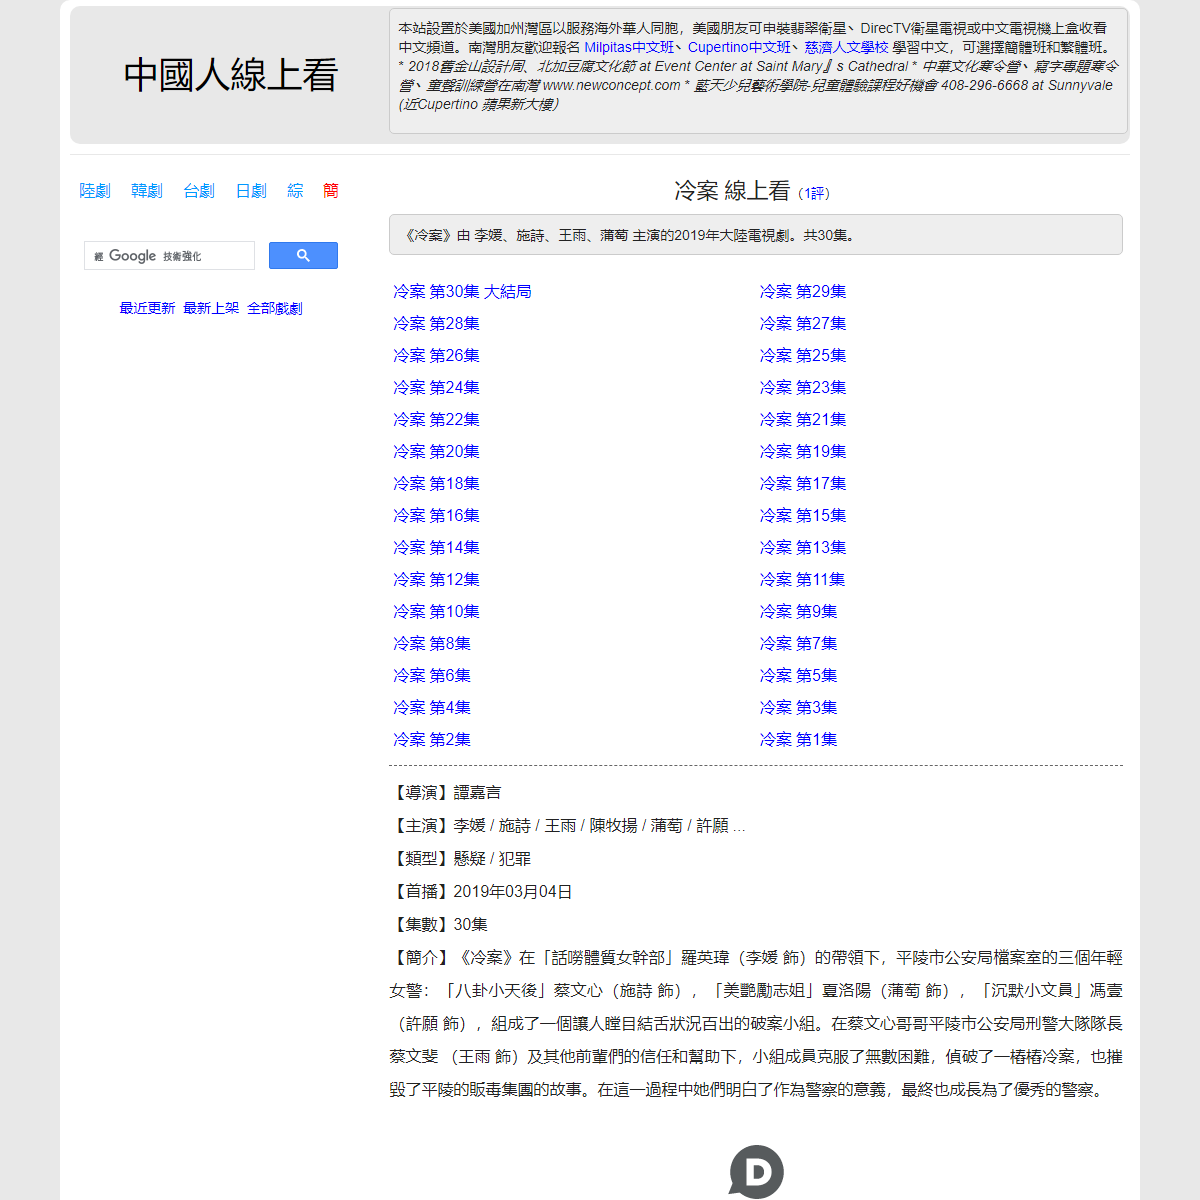 A complete backup of https://chinaq.tv/cn190304d/